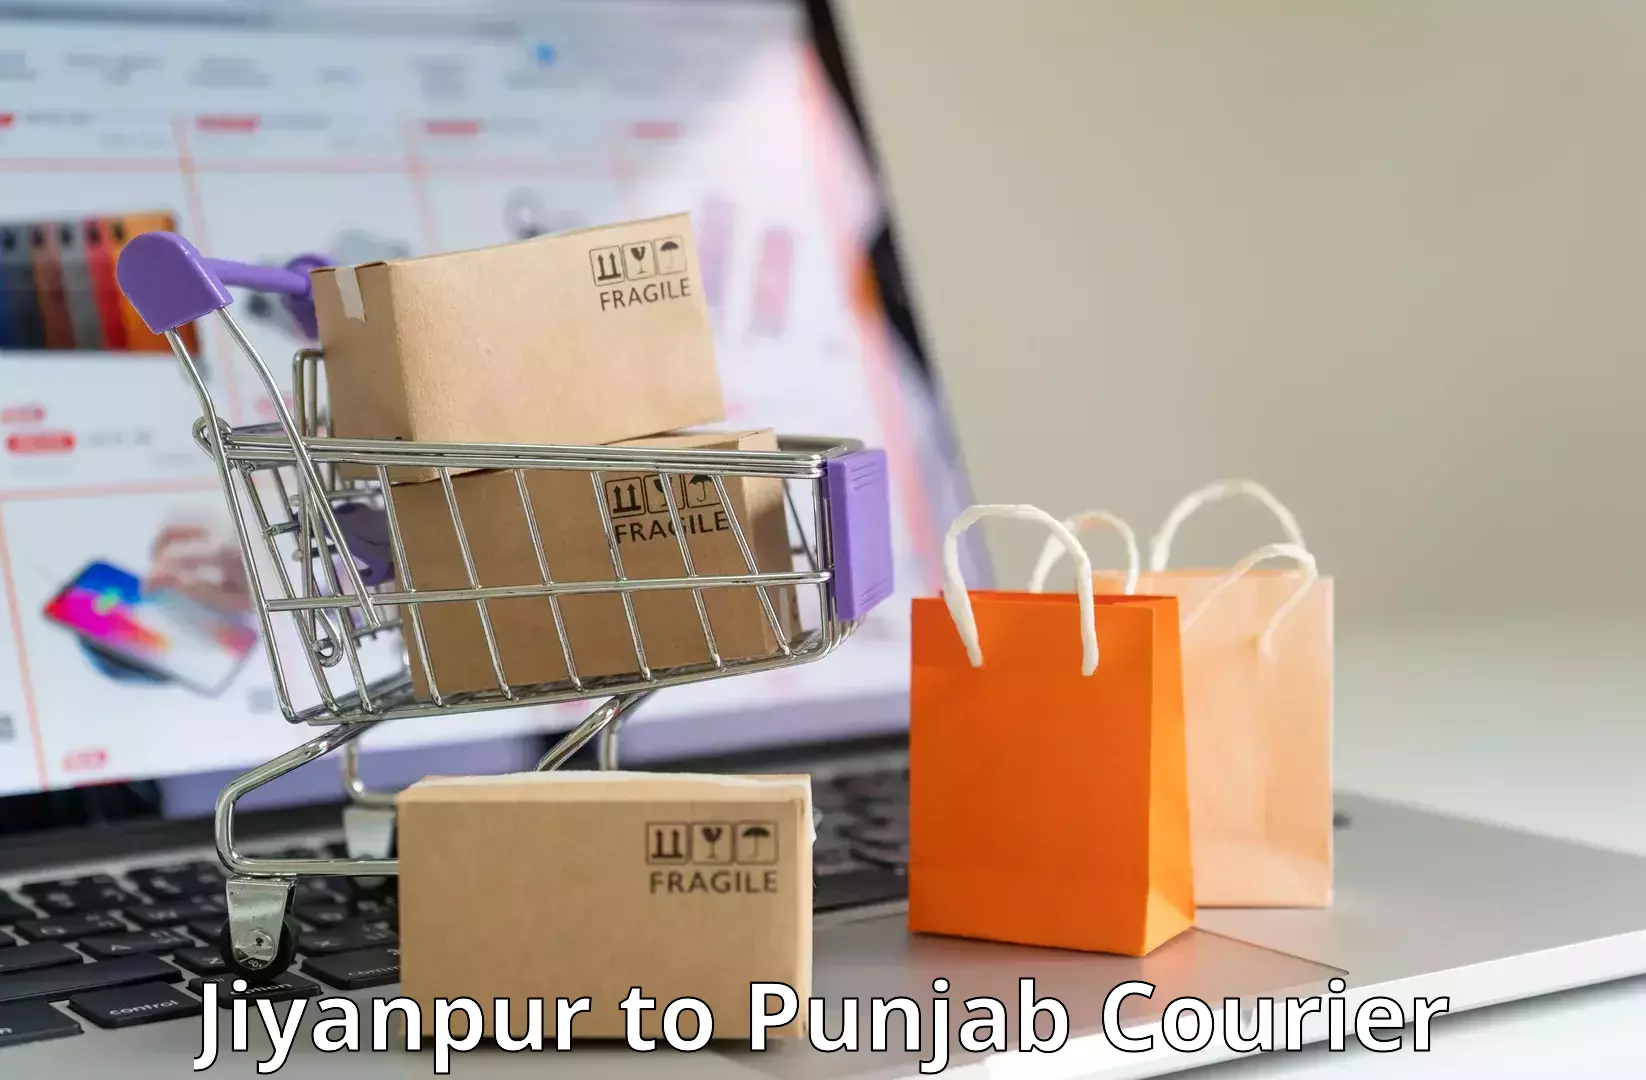 Professional parcel services Jiyanpur to Punjab